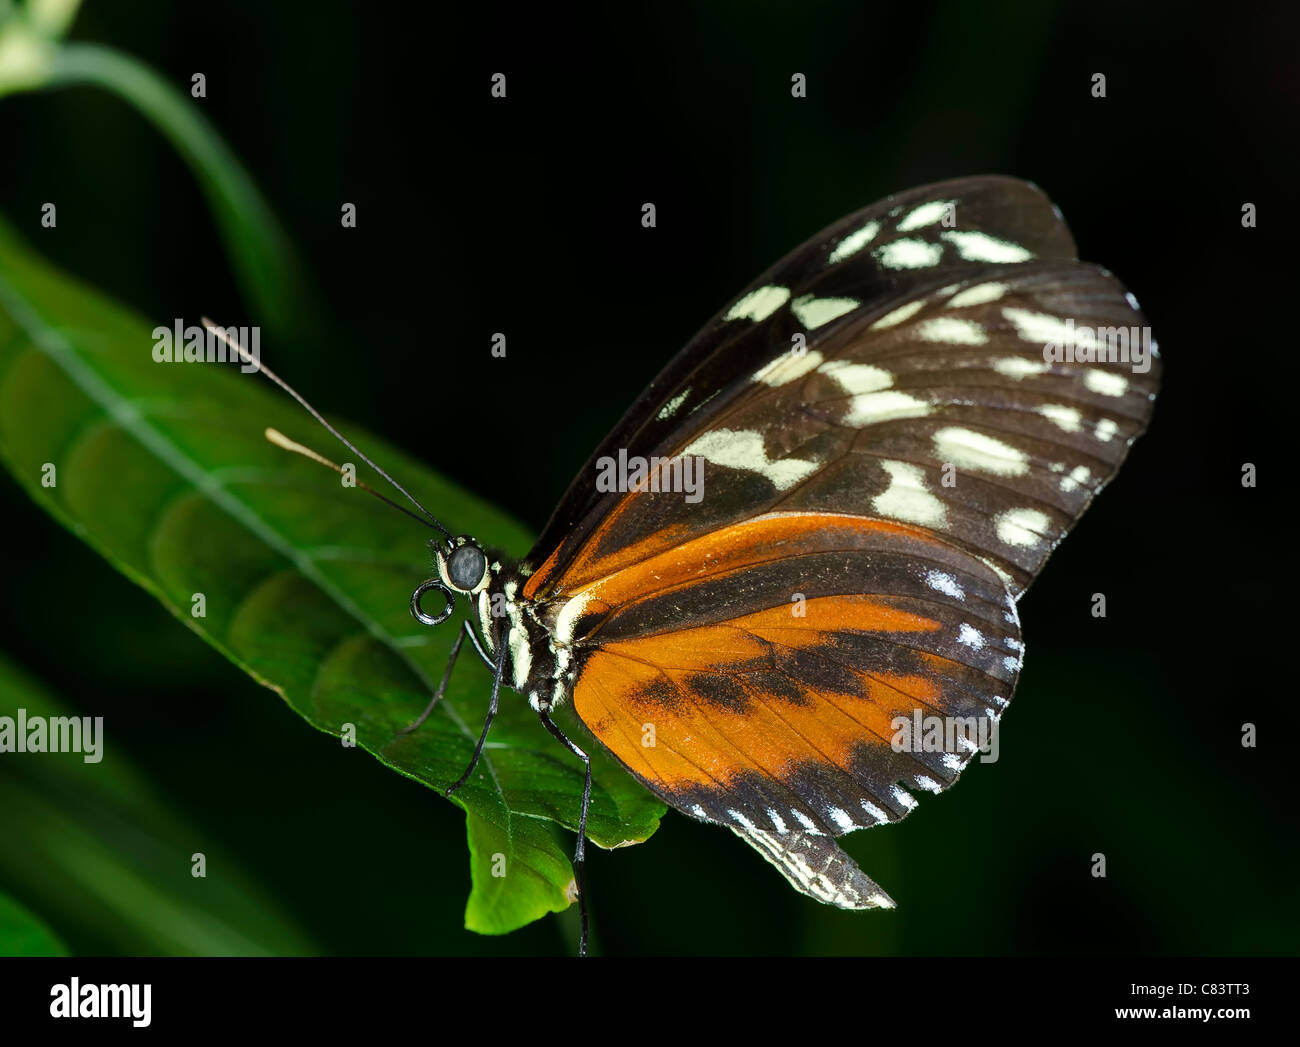 A Tiger Longwing Butterfly (Heliconius hecale) of the Nymphalidae family, ranging in Central and South America. Stock Photo